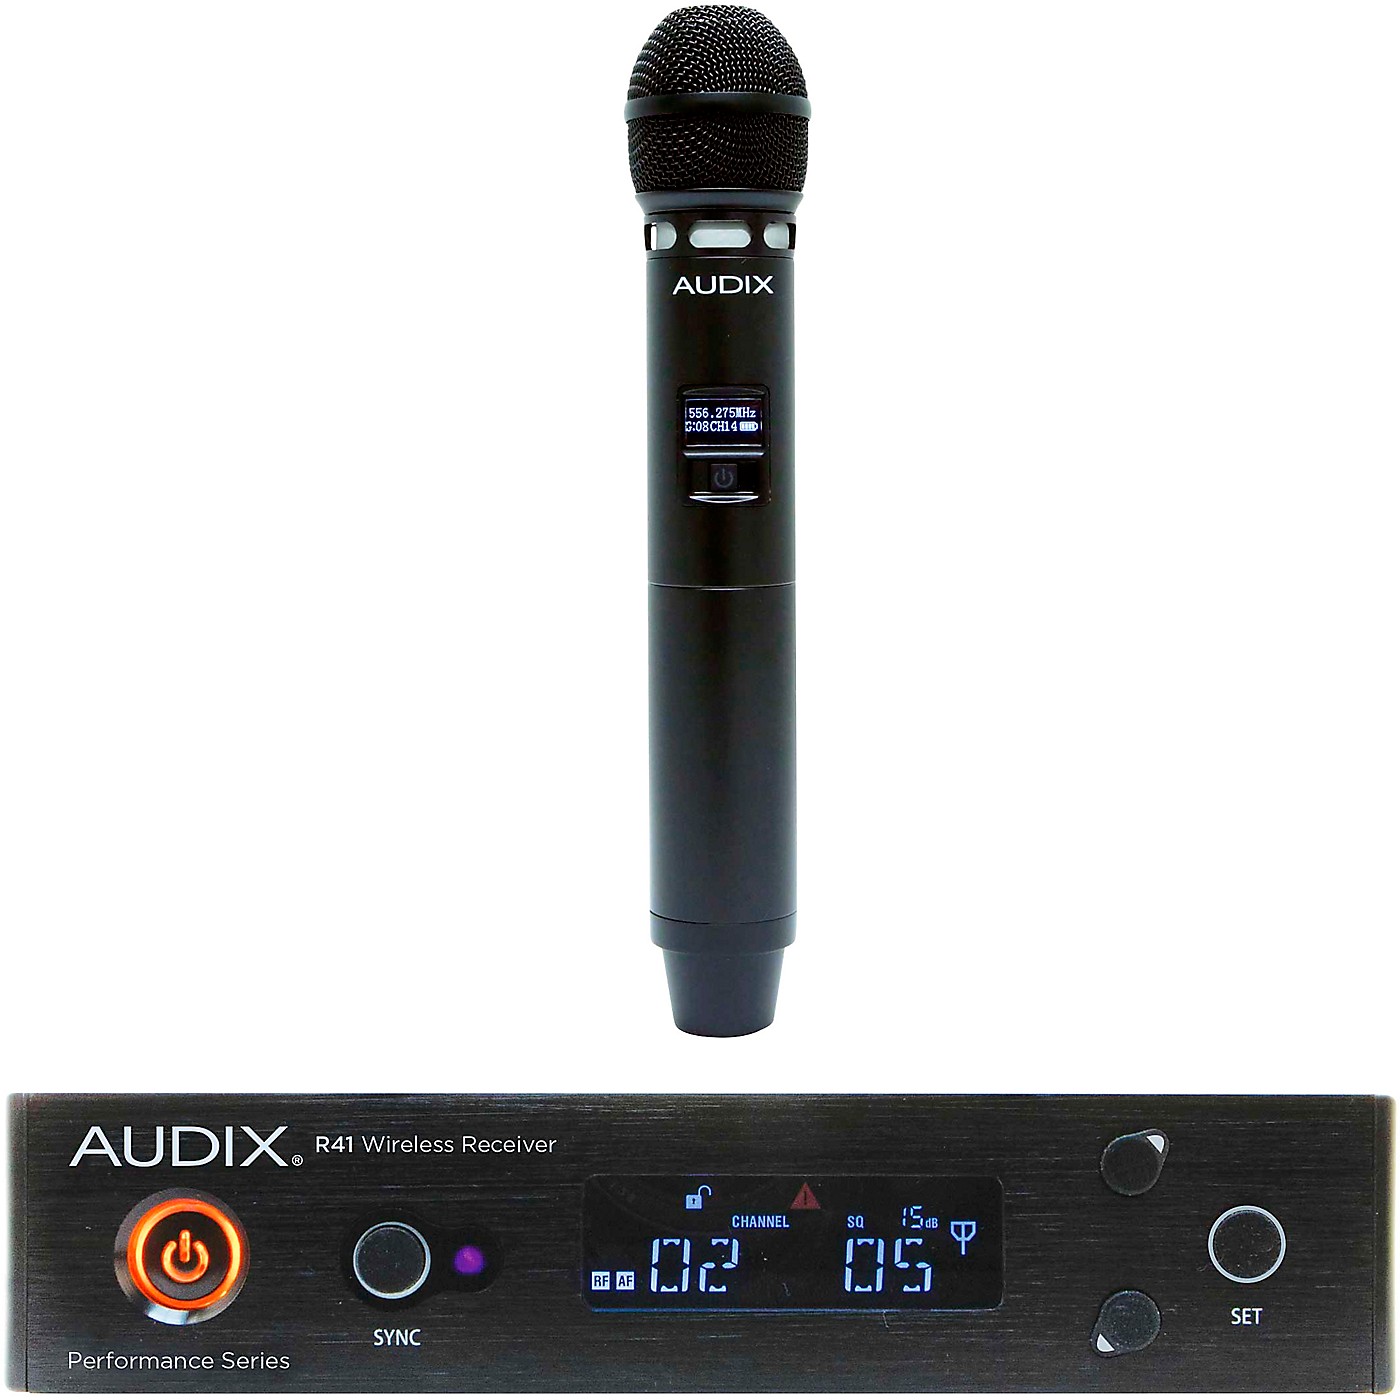 Audix AP41 VX5 Wireless Microphone System With R41 Diversity Receiver and H60/VX5 Handheld Transmitter thumbnail